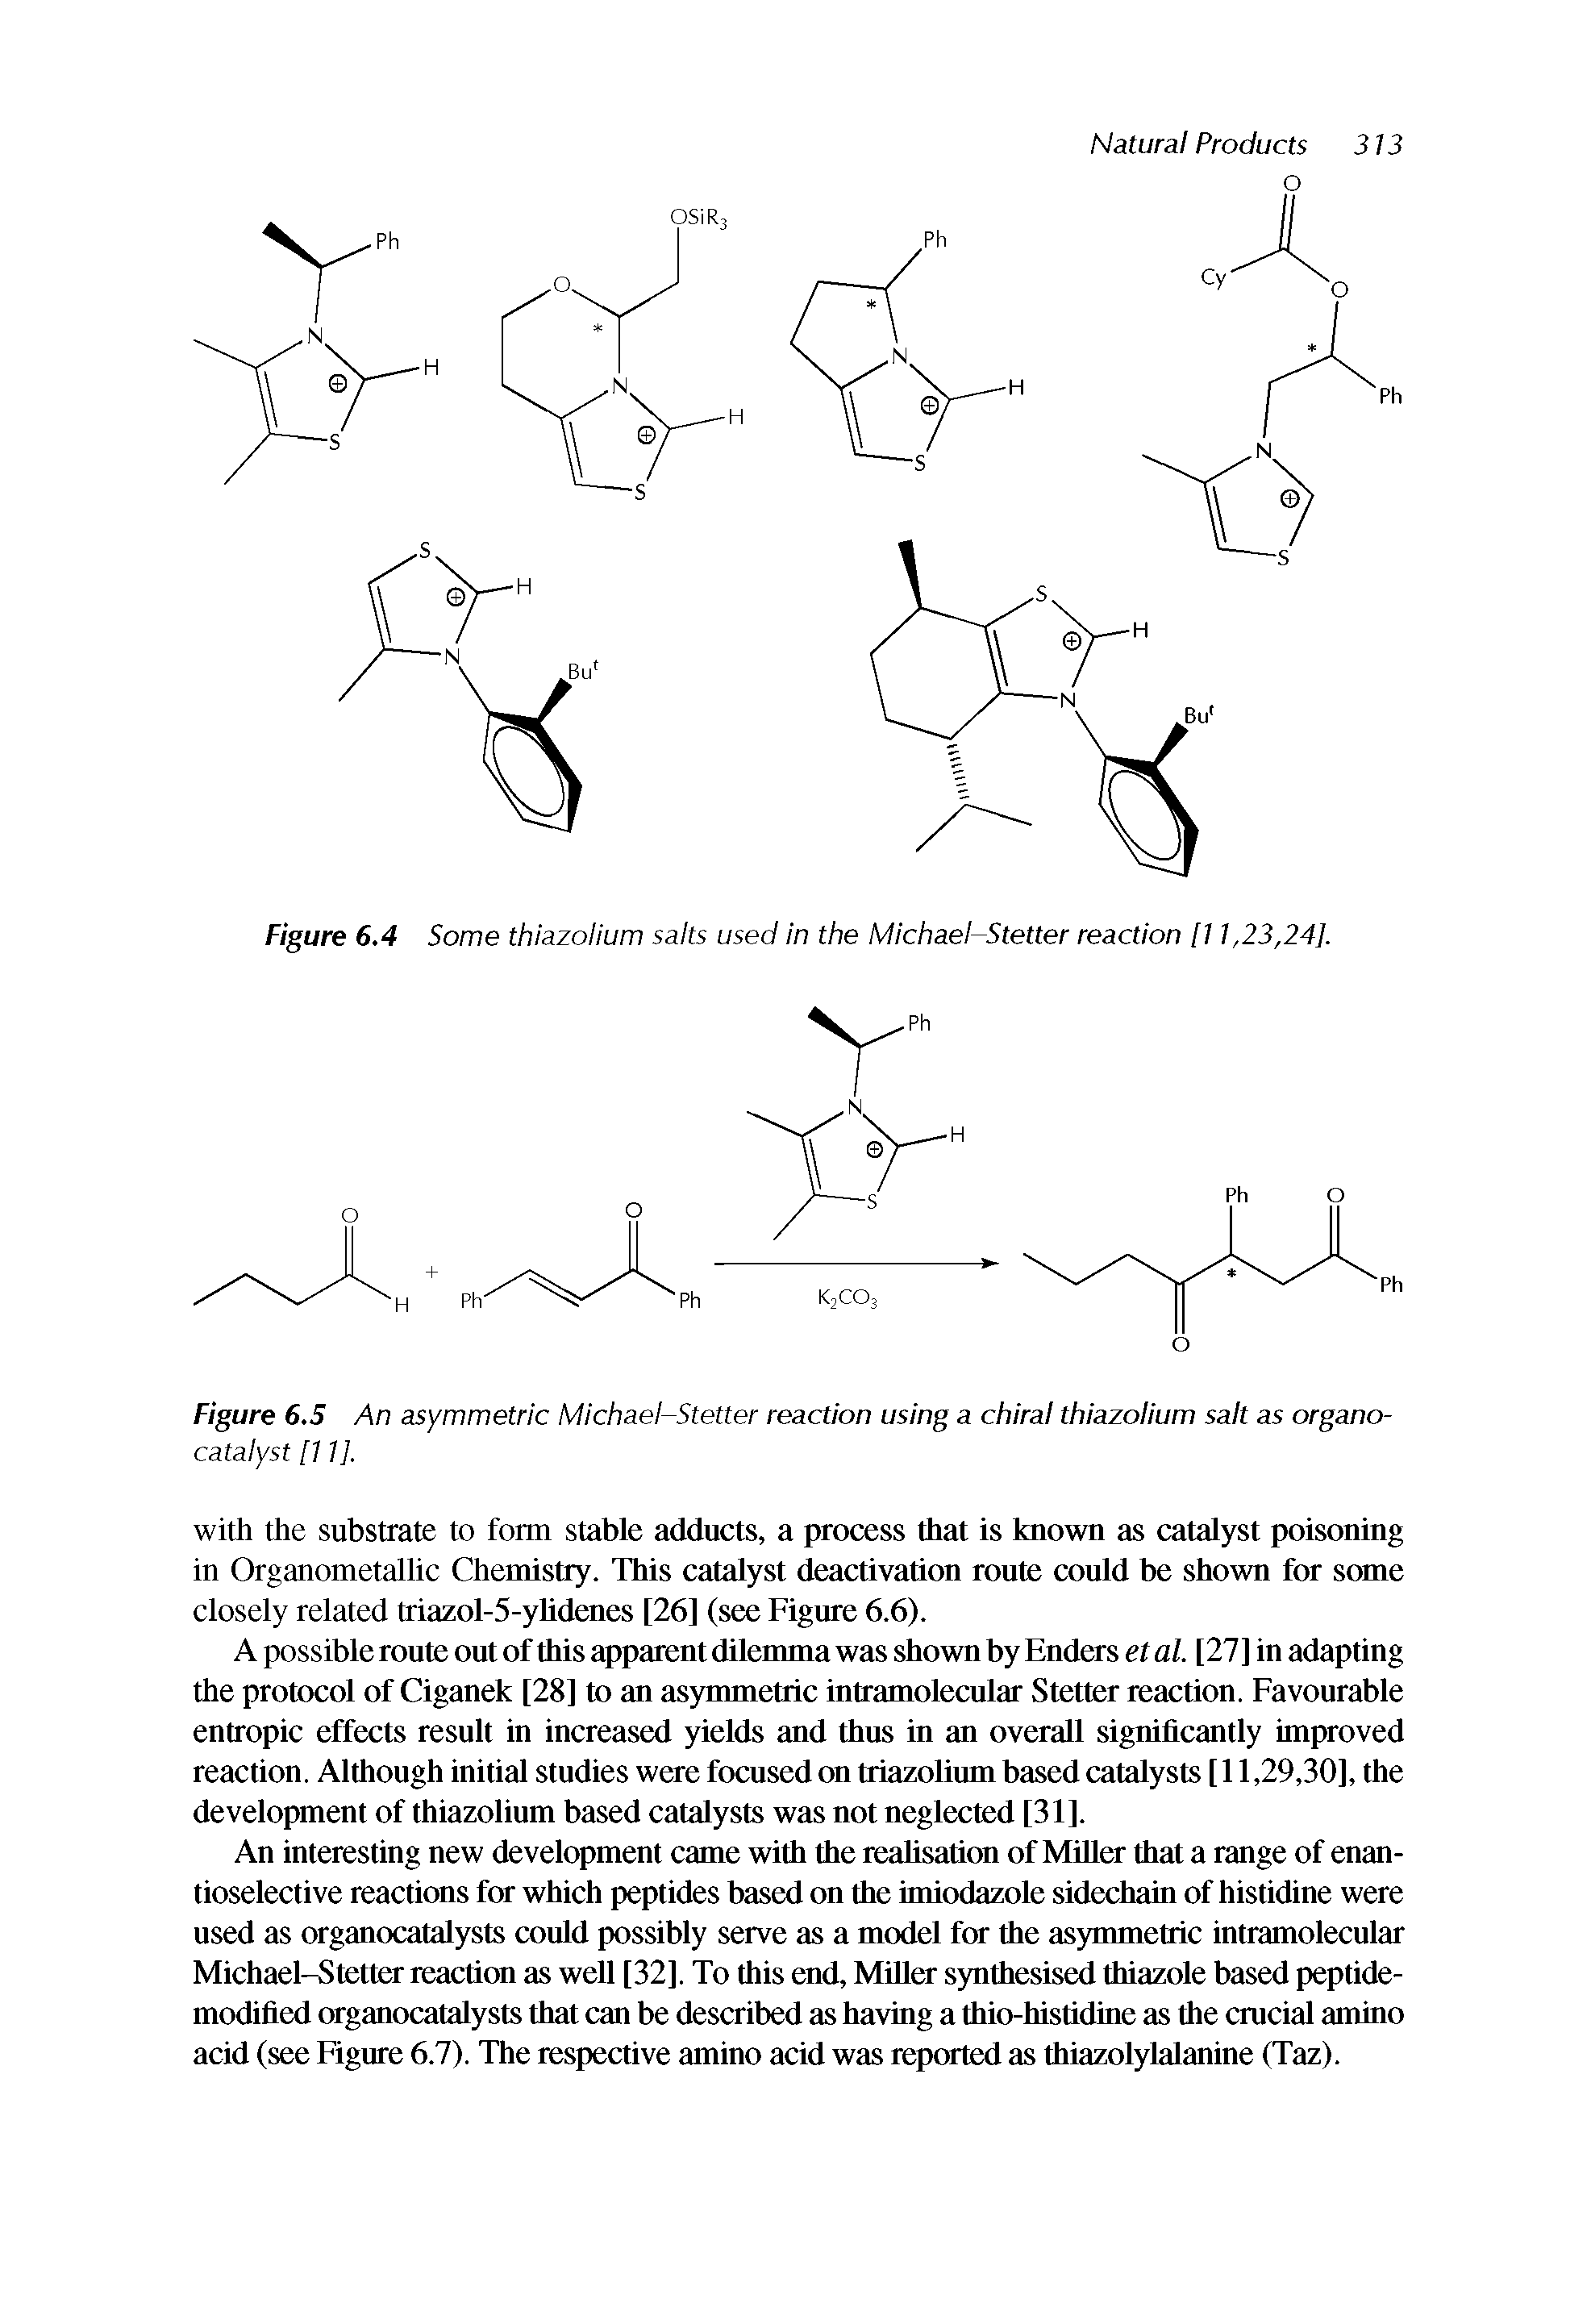 Figure 6.4 Some thiazolium salts used In the MIchael-Stetter reaction [11,23,24],...